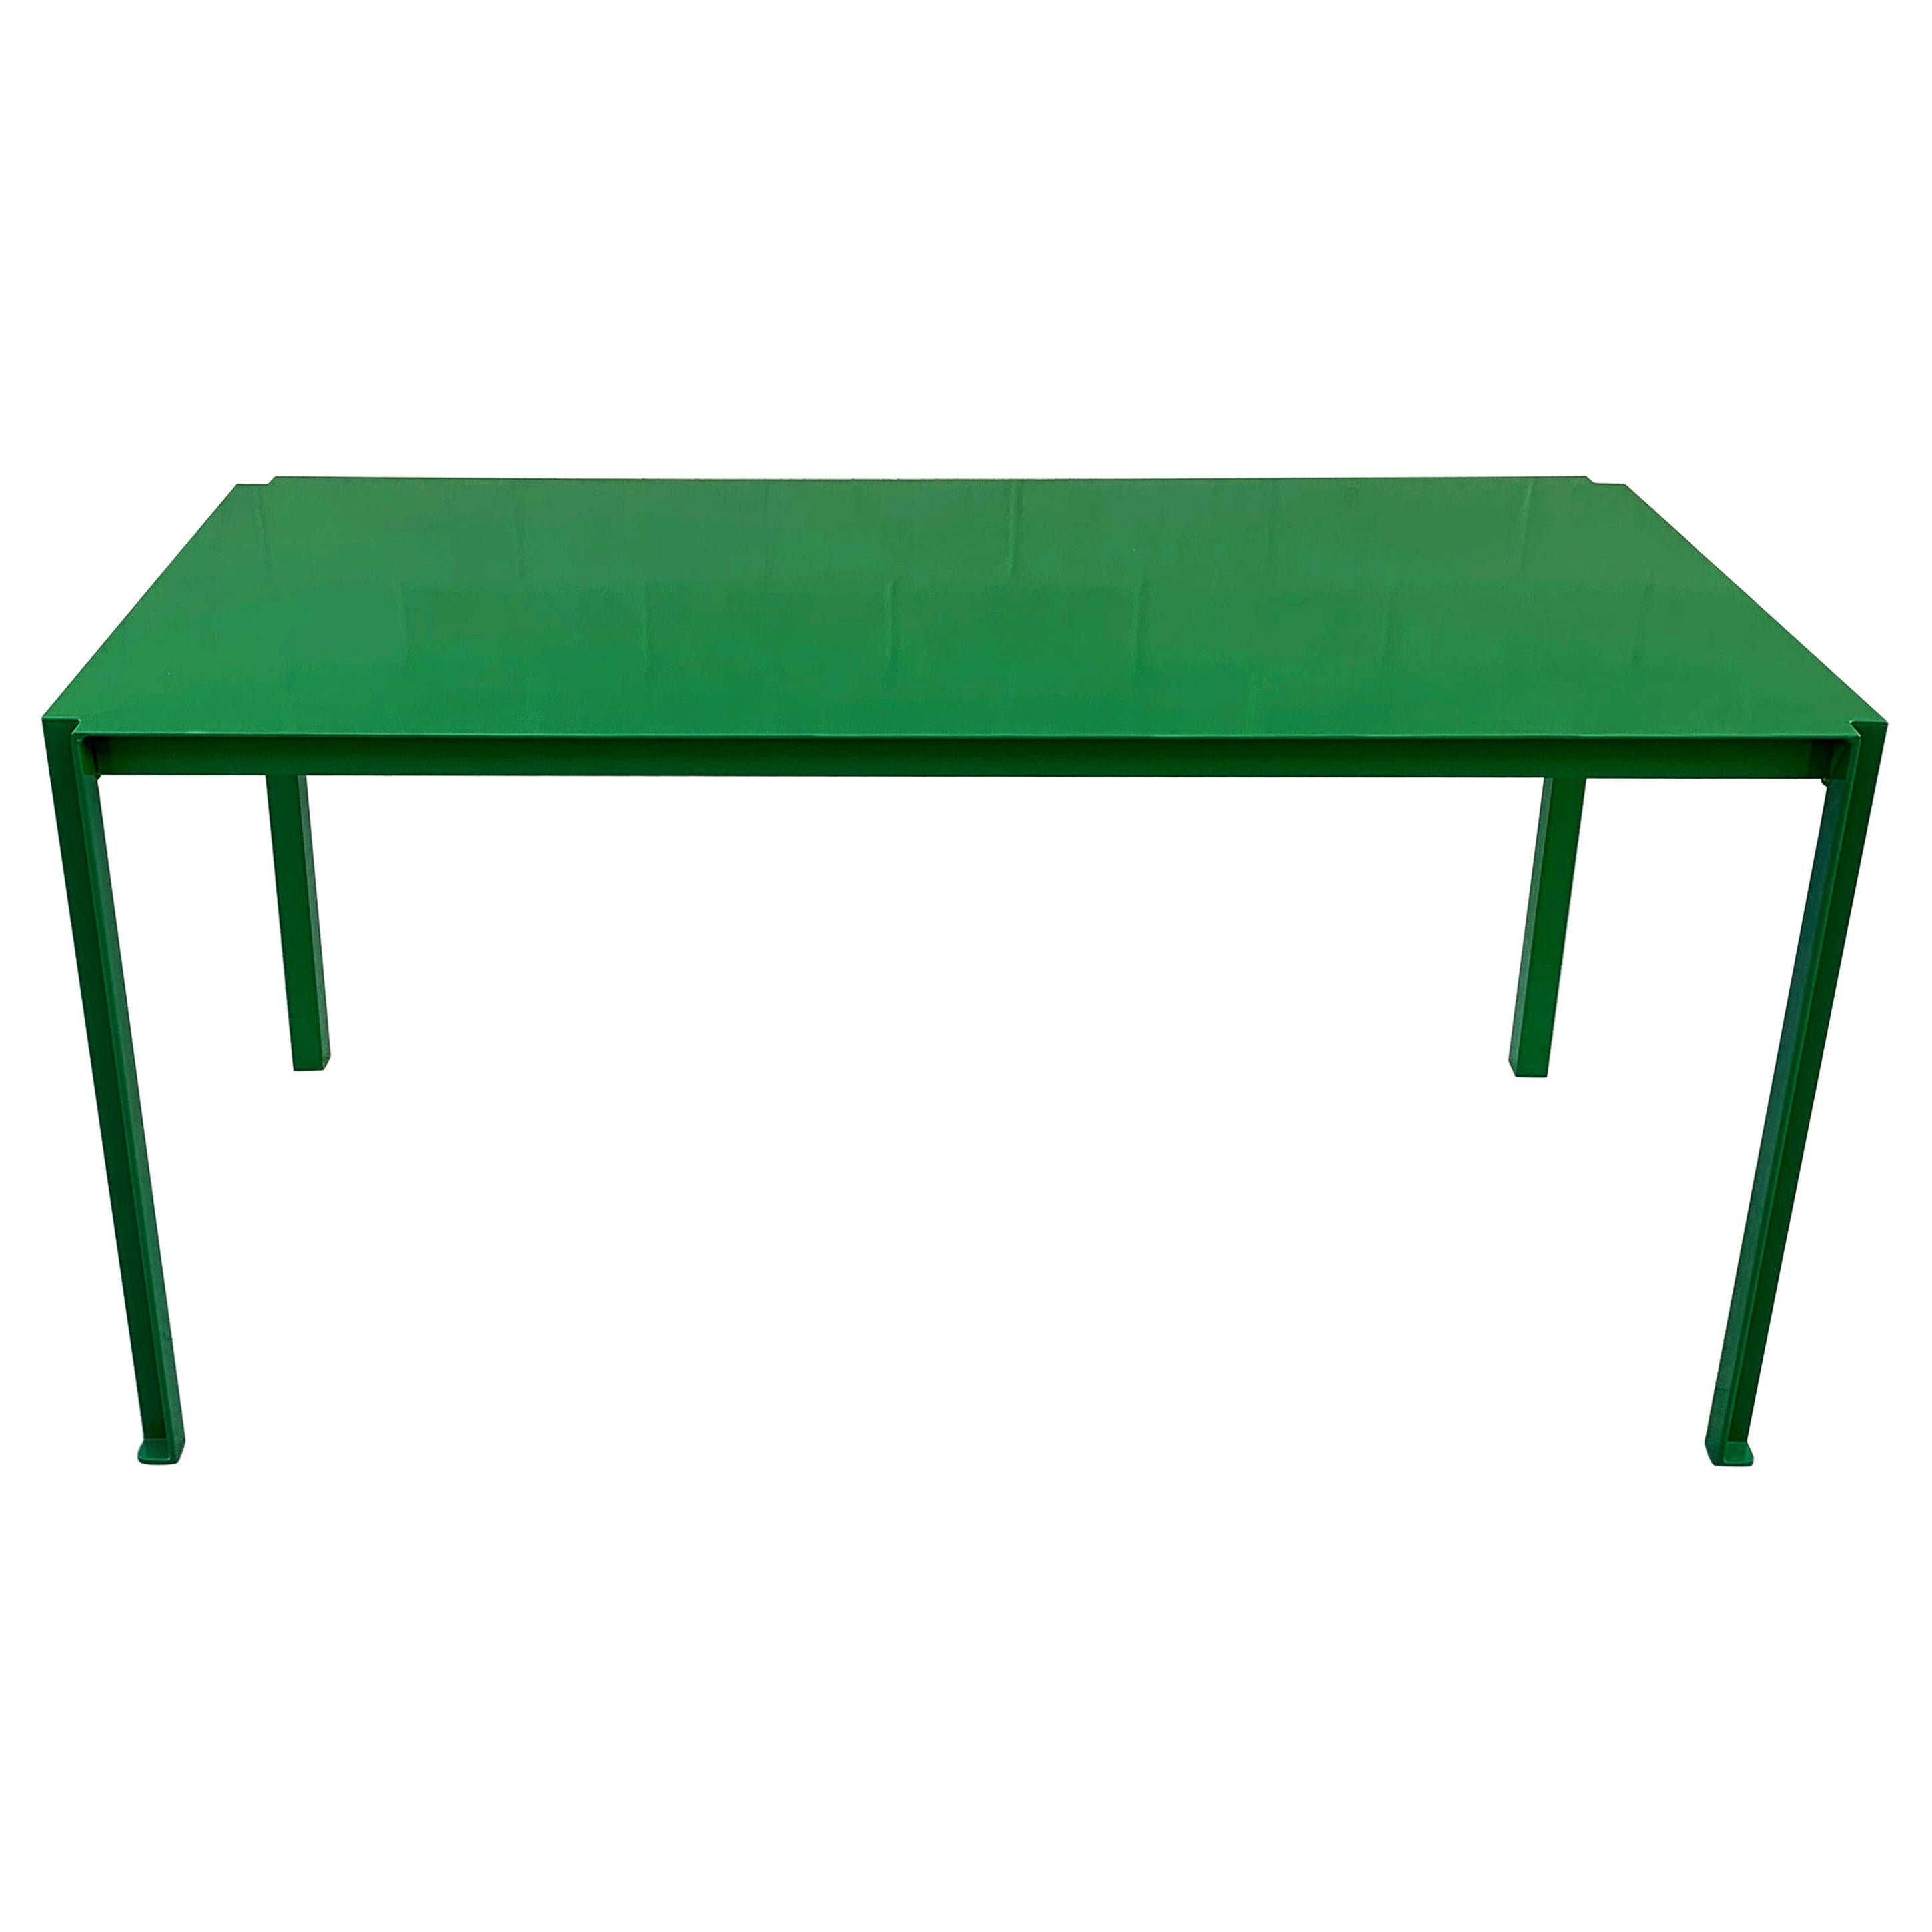 Tanker Inspired Steel Dining or Work Table Made to Order, Custom Colors For Sale